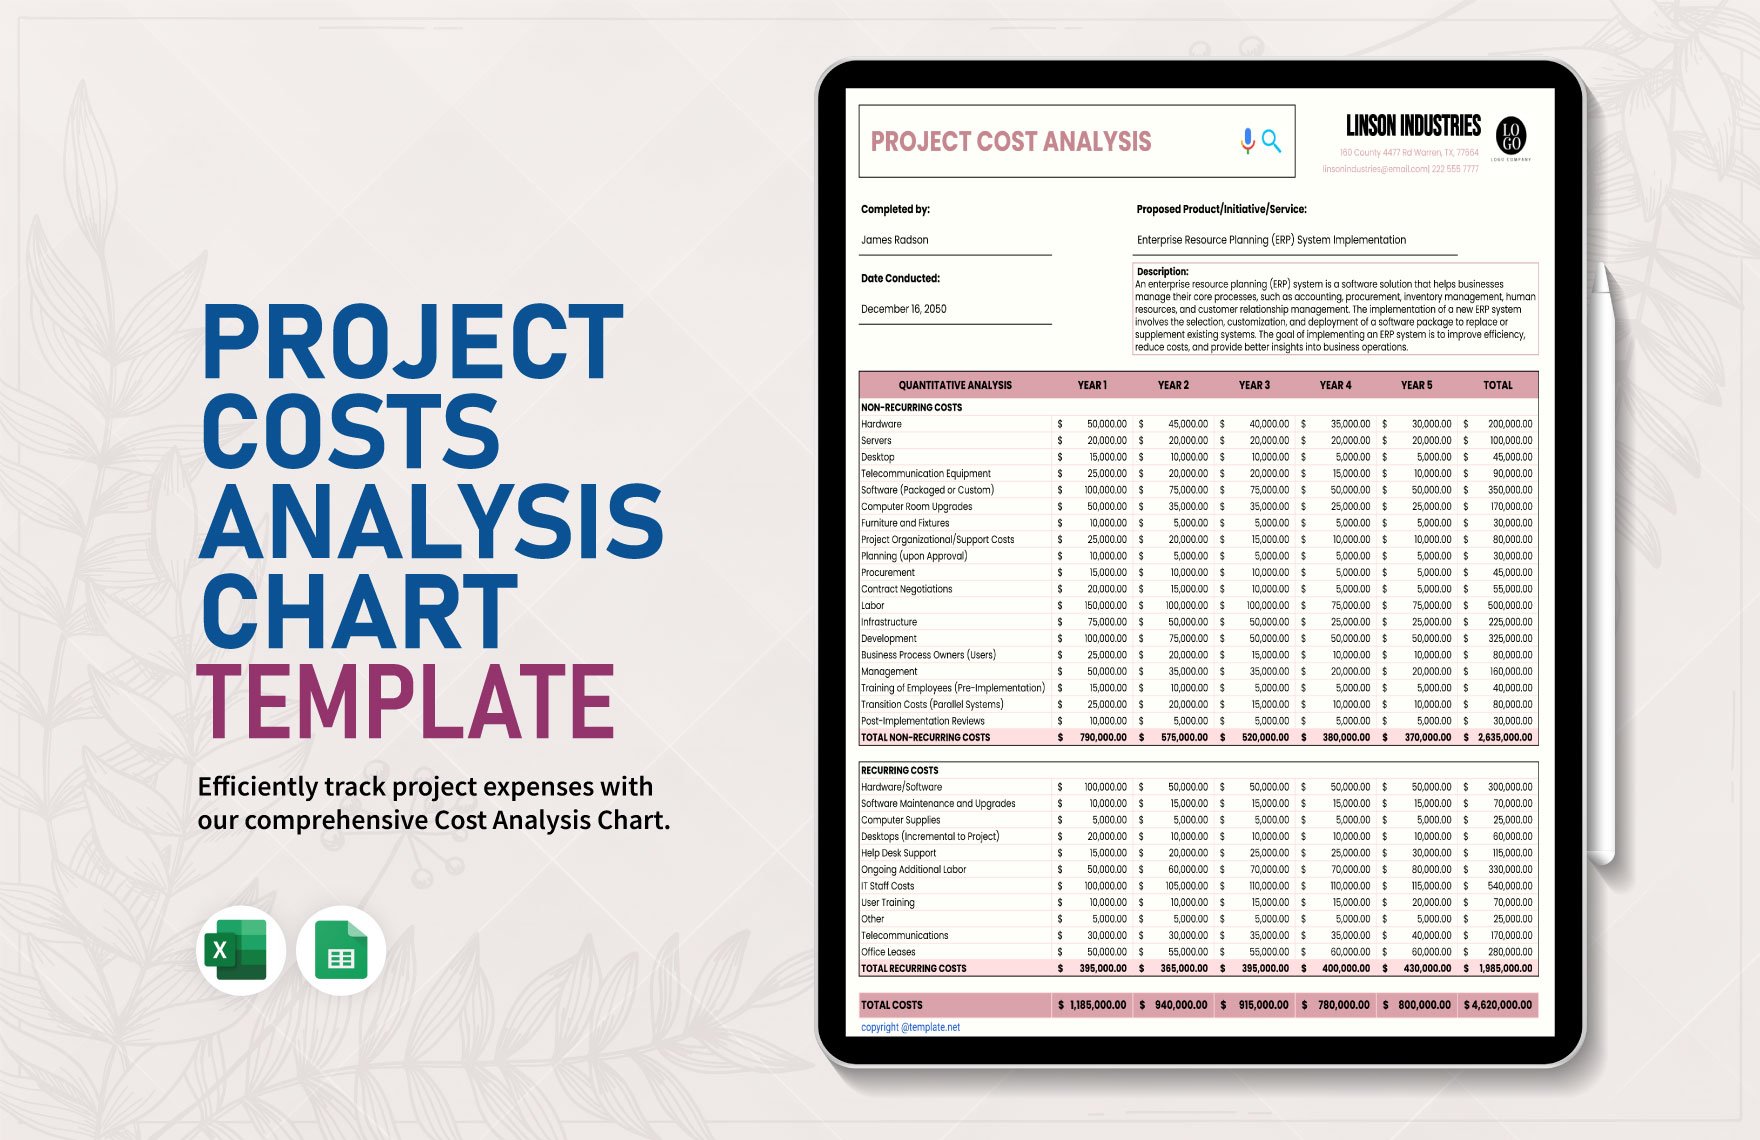 Project Cost Analysis Chart Template in Excel, Google Sheets